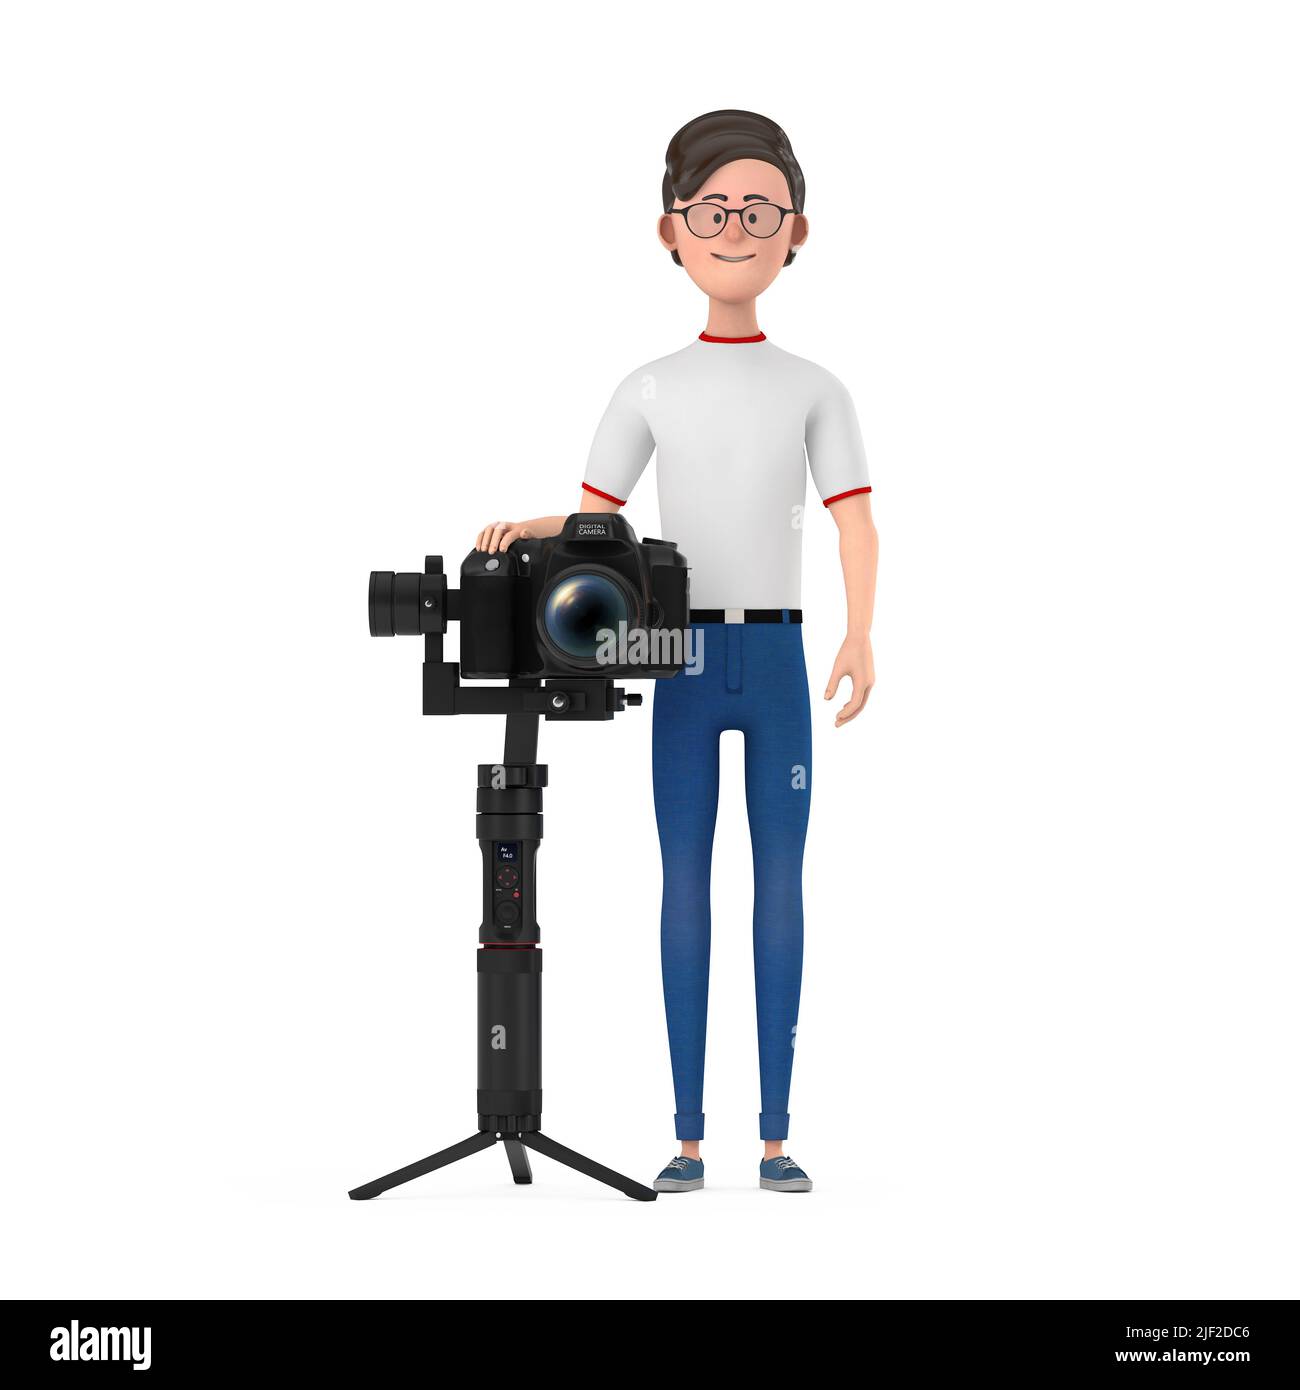 Cartoon Character Person Man with DSLR or Video Camera Gimbal Stabilization Tripod System on a white background. 3d Rendering Stock Photo